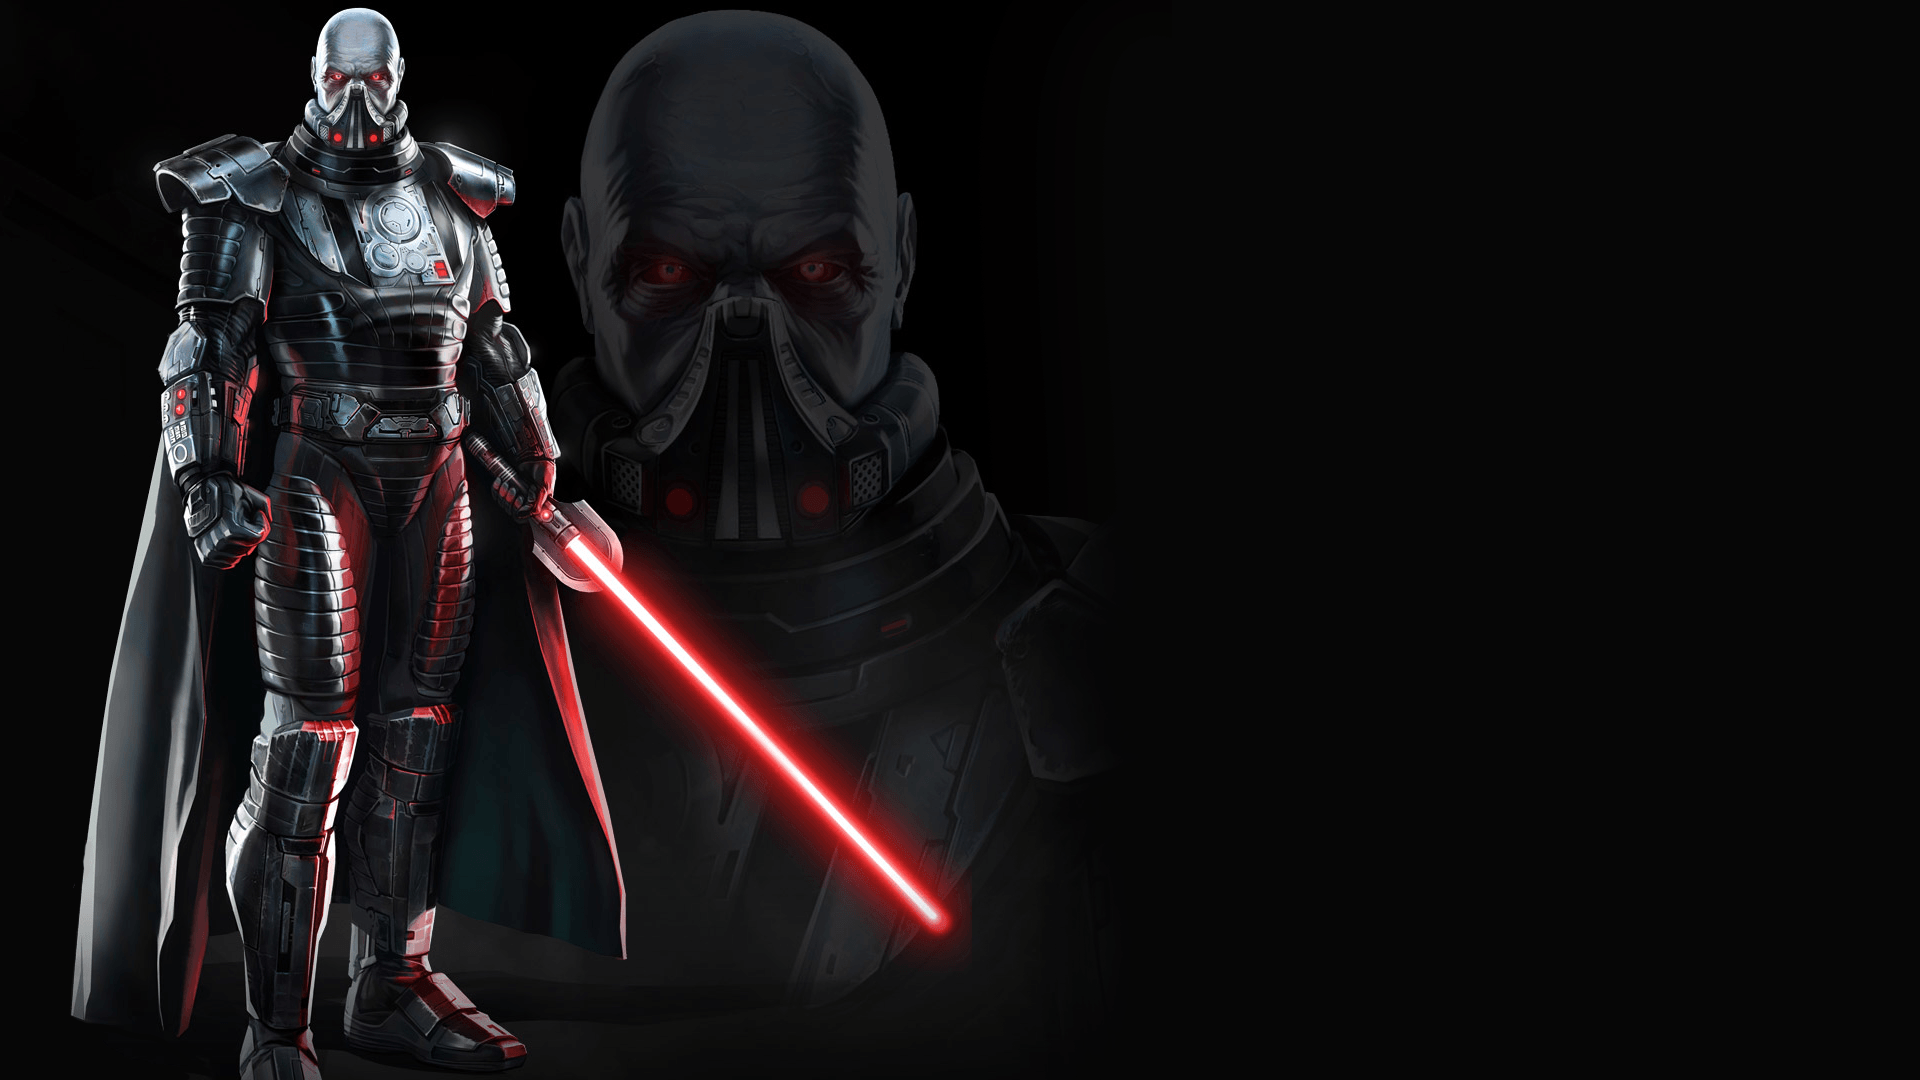 Sith Lightsabers Wallpaper Picture